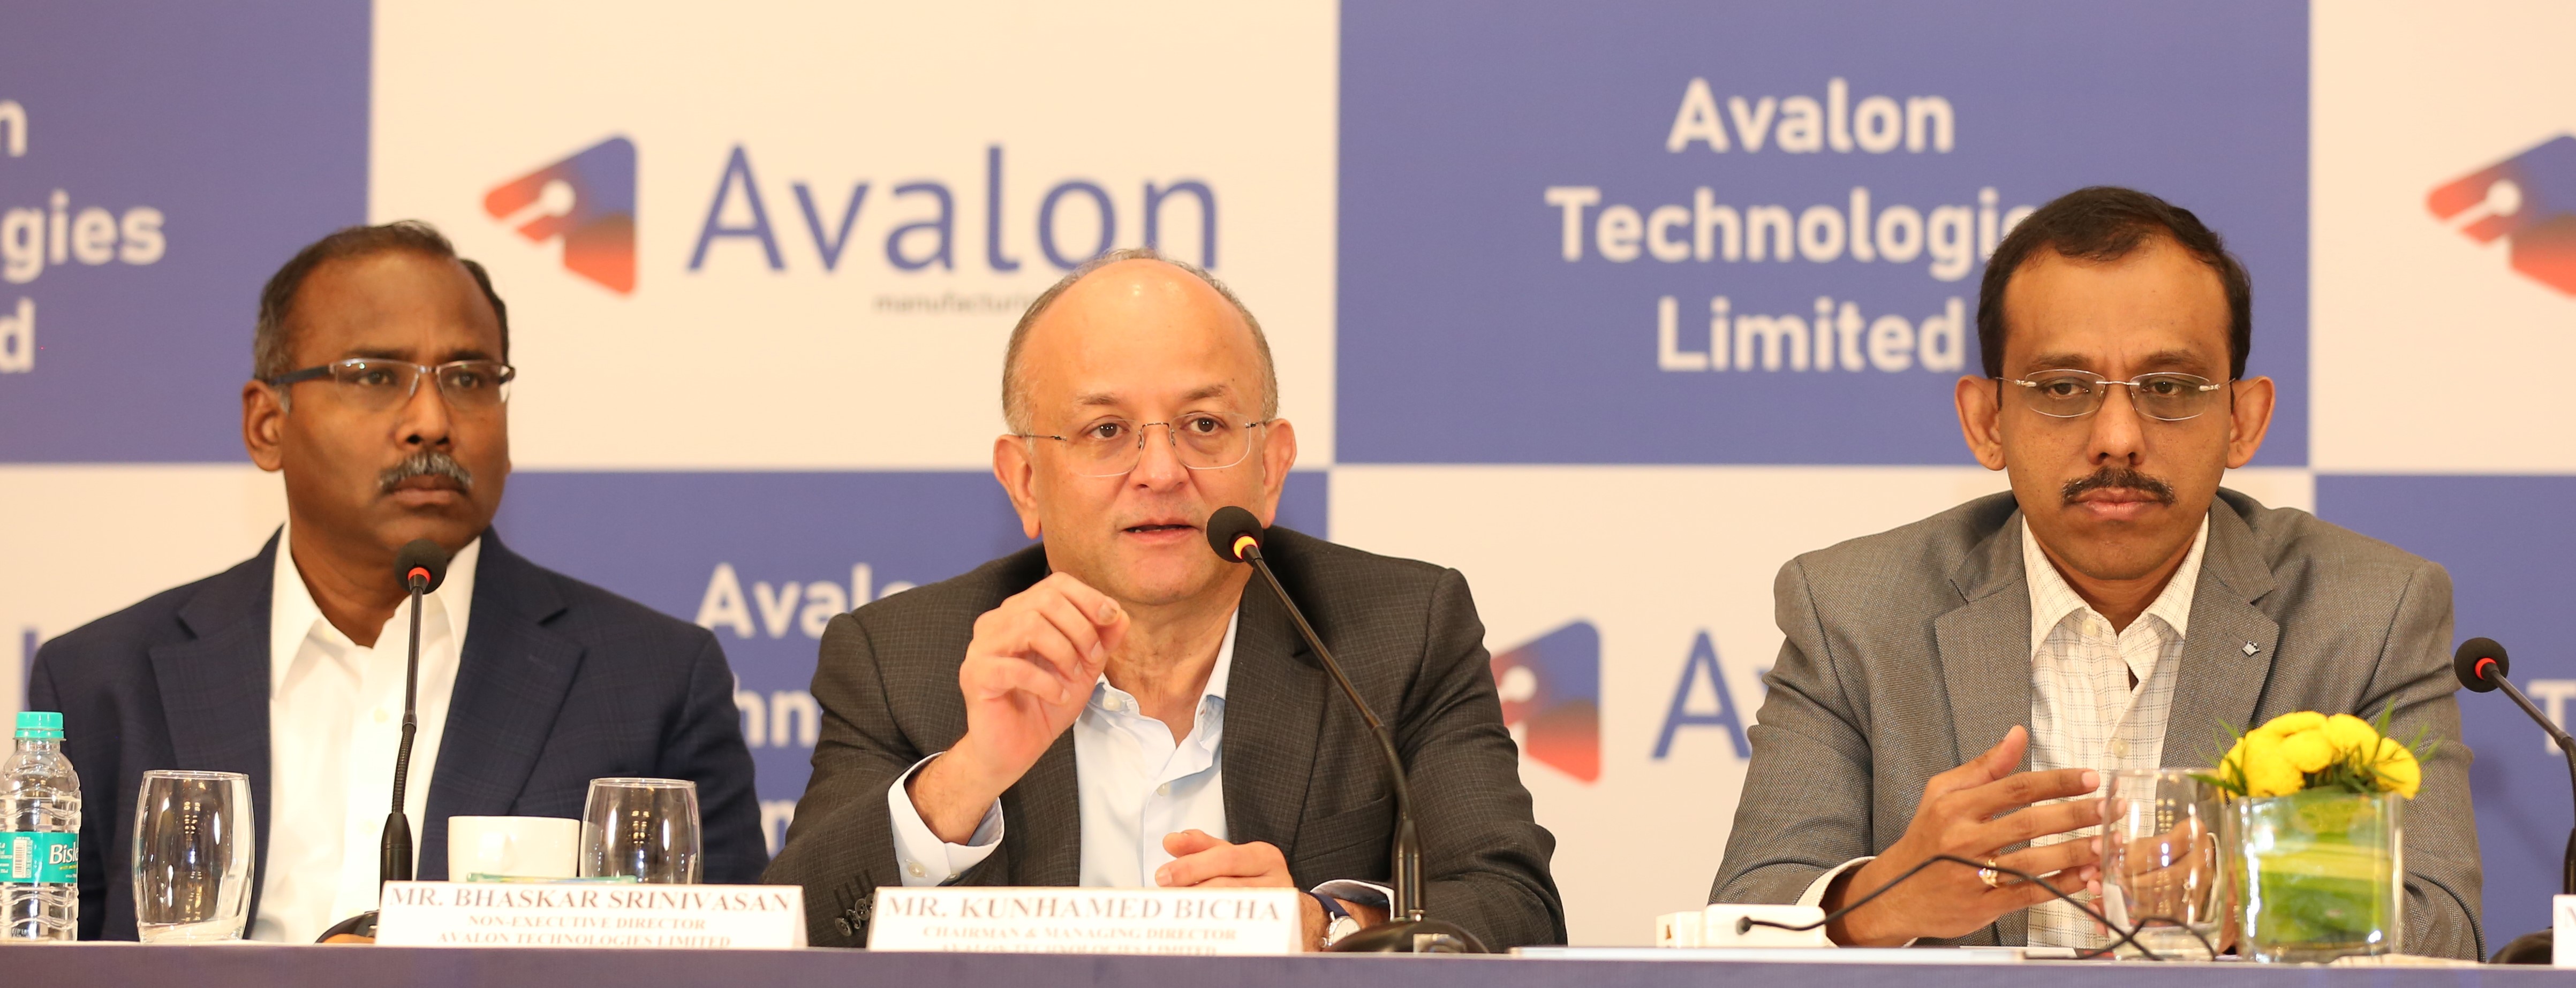 AVALON TECHNOLOGIES LIMITED INTIAL PUBLIC OFFER TO OPEN ON APRIL 3, 2023